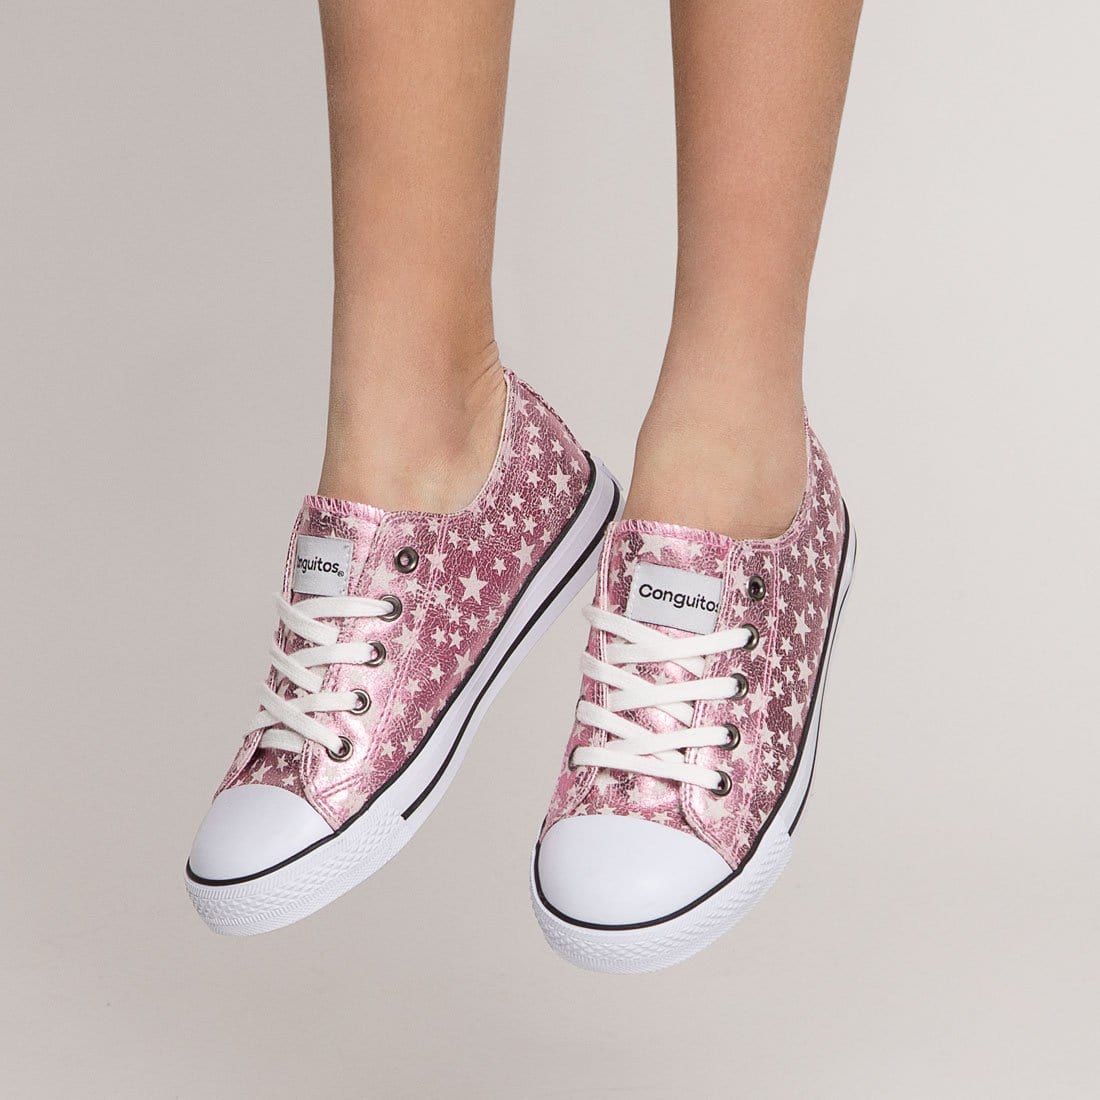 CONGUITOS Shoes Girl's Pink Star Sneakers